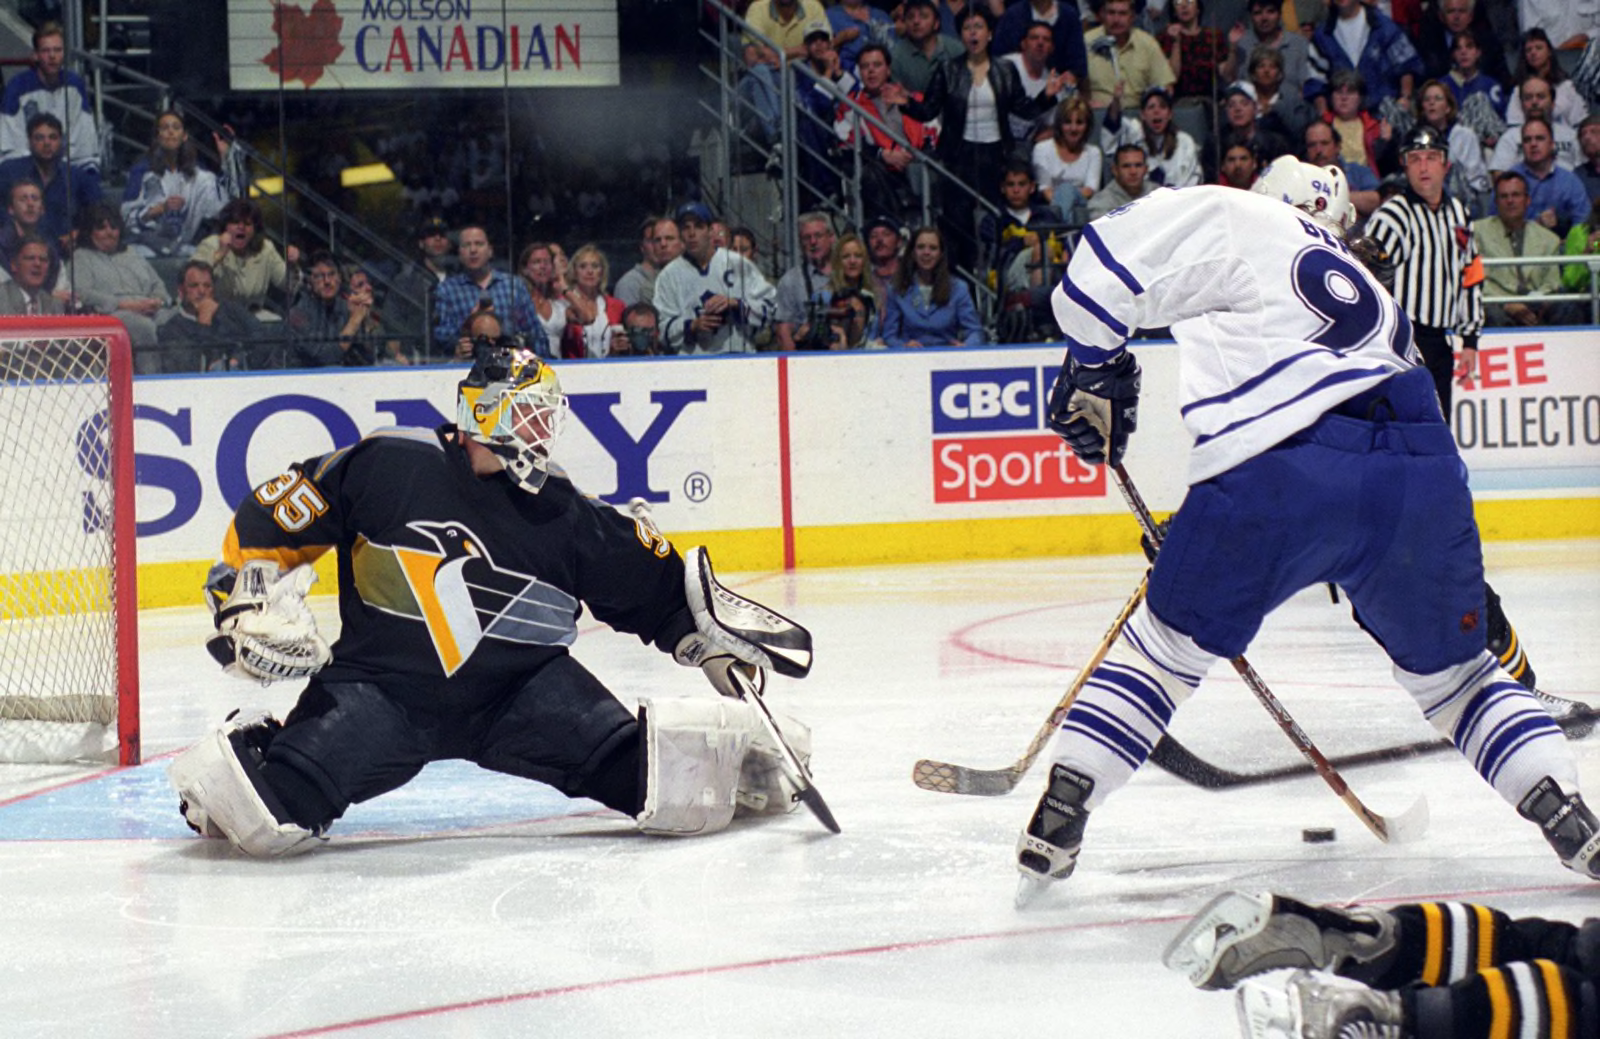 Tom Barrasso inducted to Hockey Hall of Fame